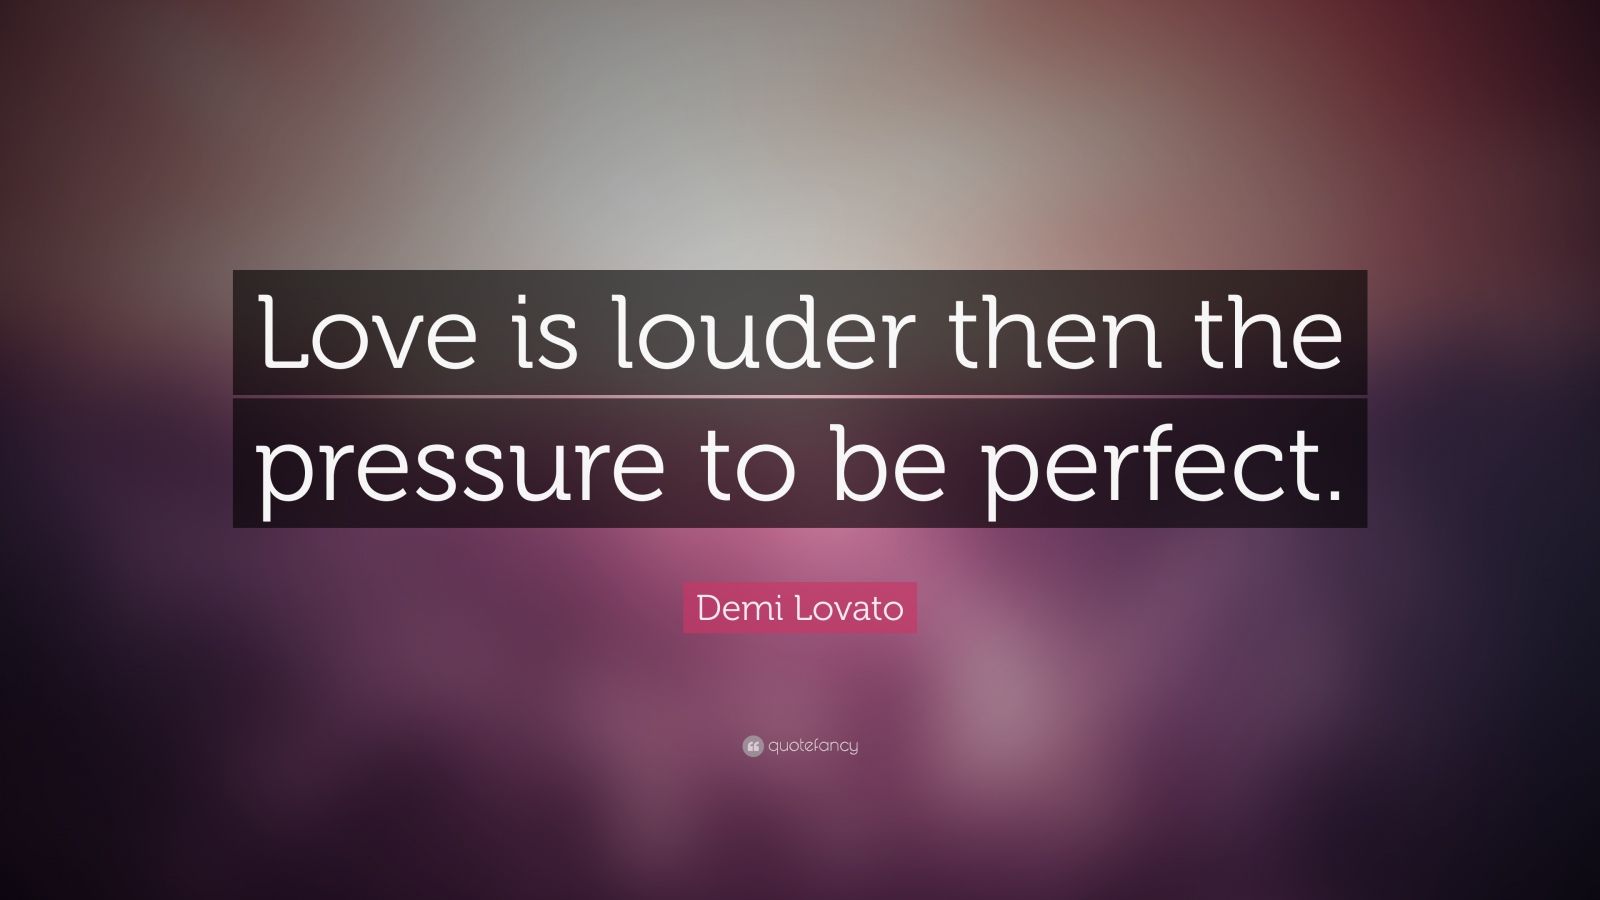 Demi Lovato Quotes (100 wallpapers) - Quotefancy